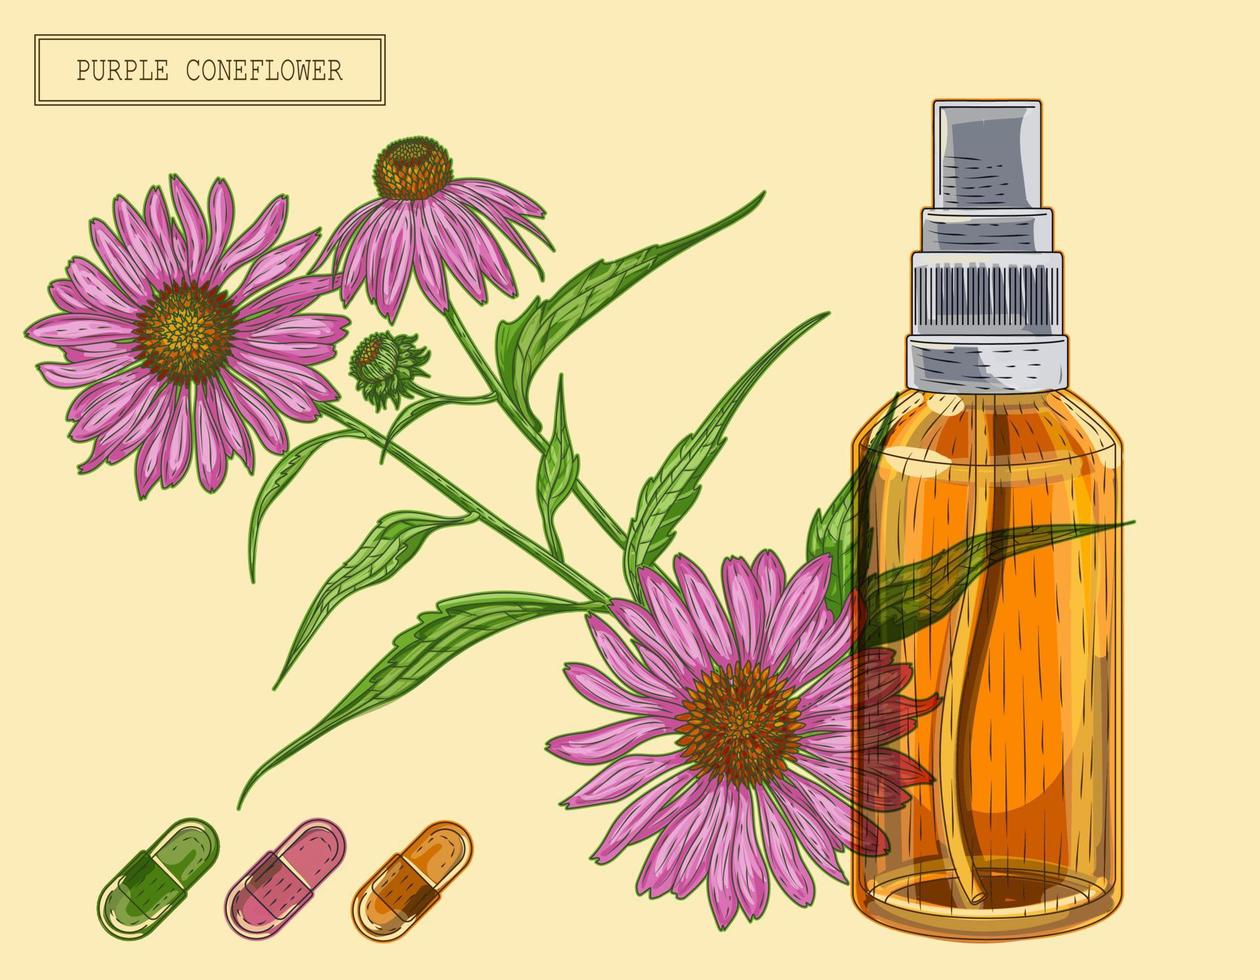 Medical purple coneflower branch and sprayer, hand drawn illustration in a retro style vector